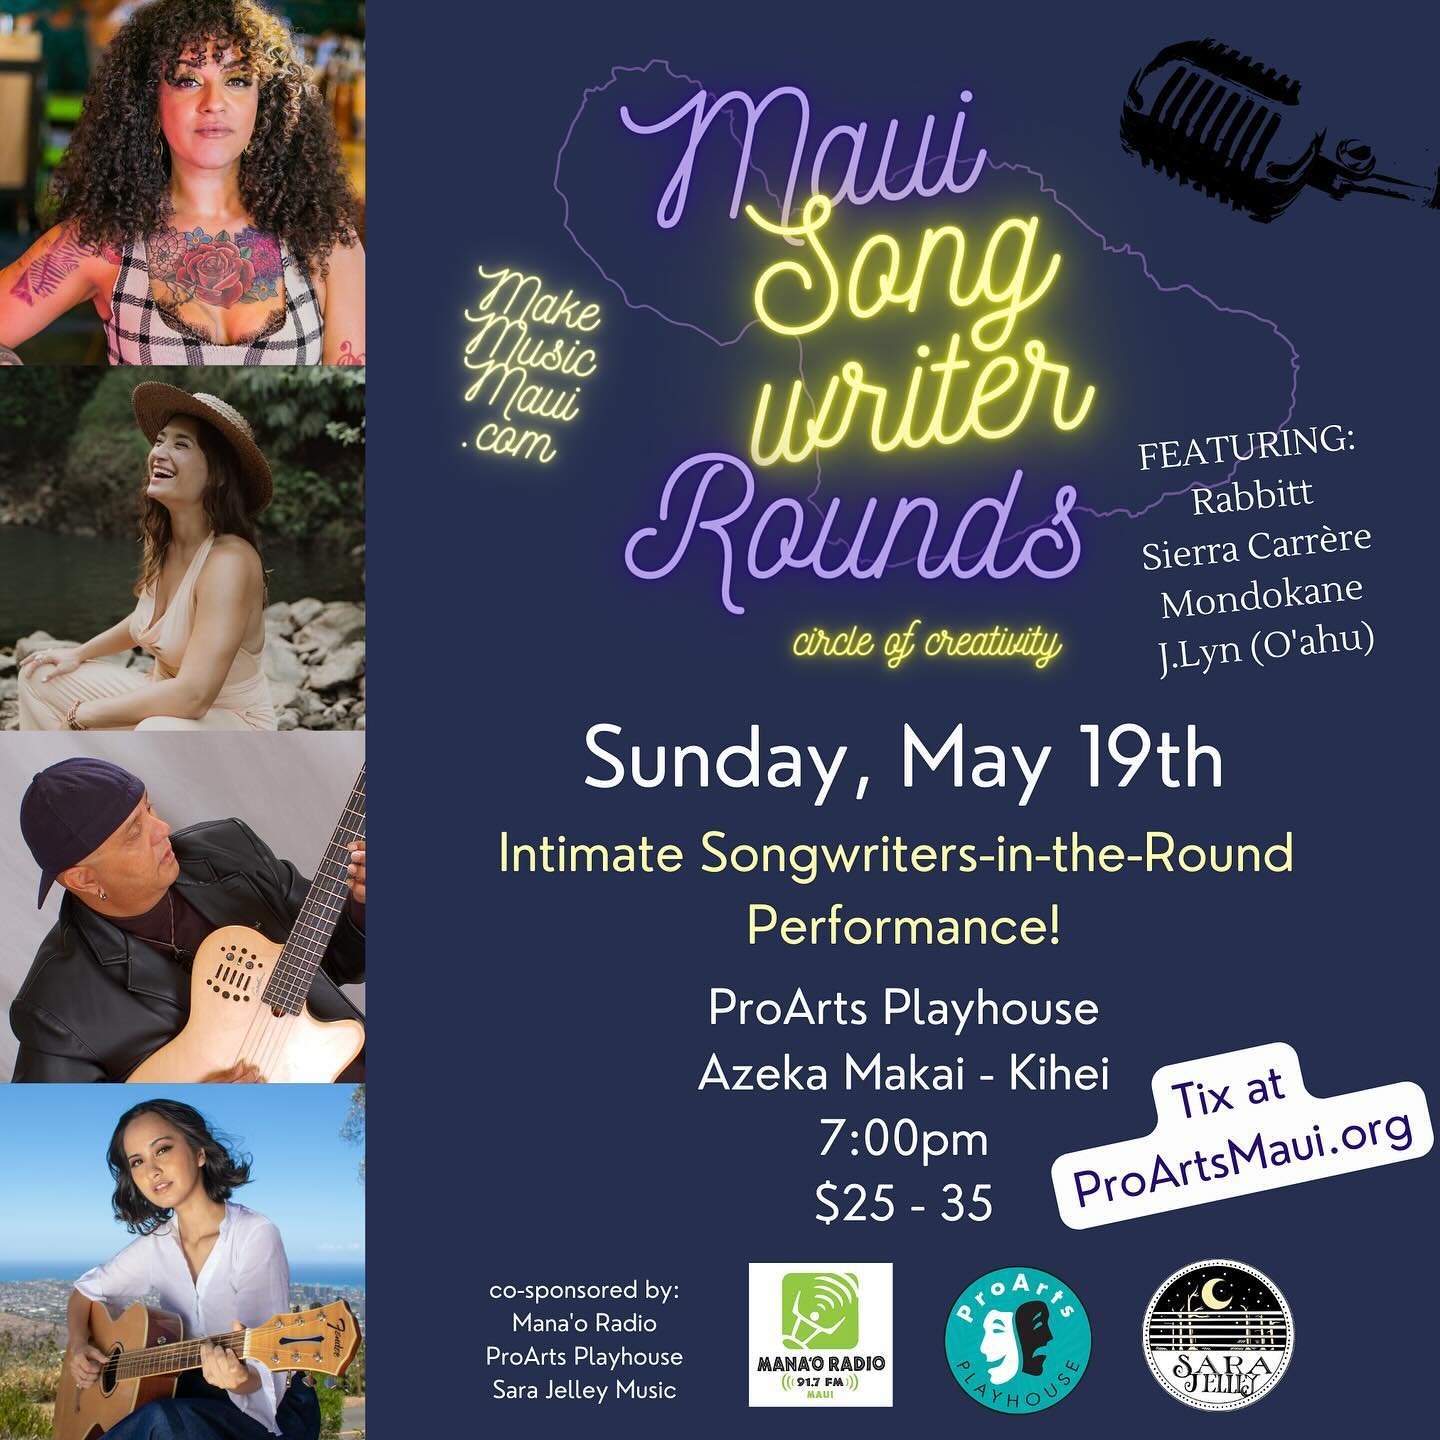 This is not just another bar gig. If you don&rsquo;t know these amazing musicians already (where&rsquo;ve you been?) you will get an INTIMATE look into their artistic process - this is the BEST listening room on Maui. You won&rsquo;t get an experienc